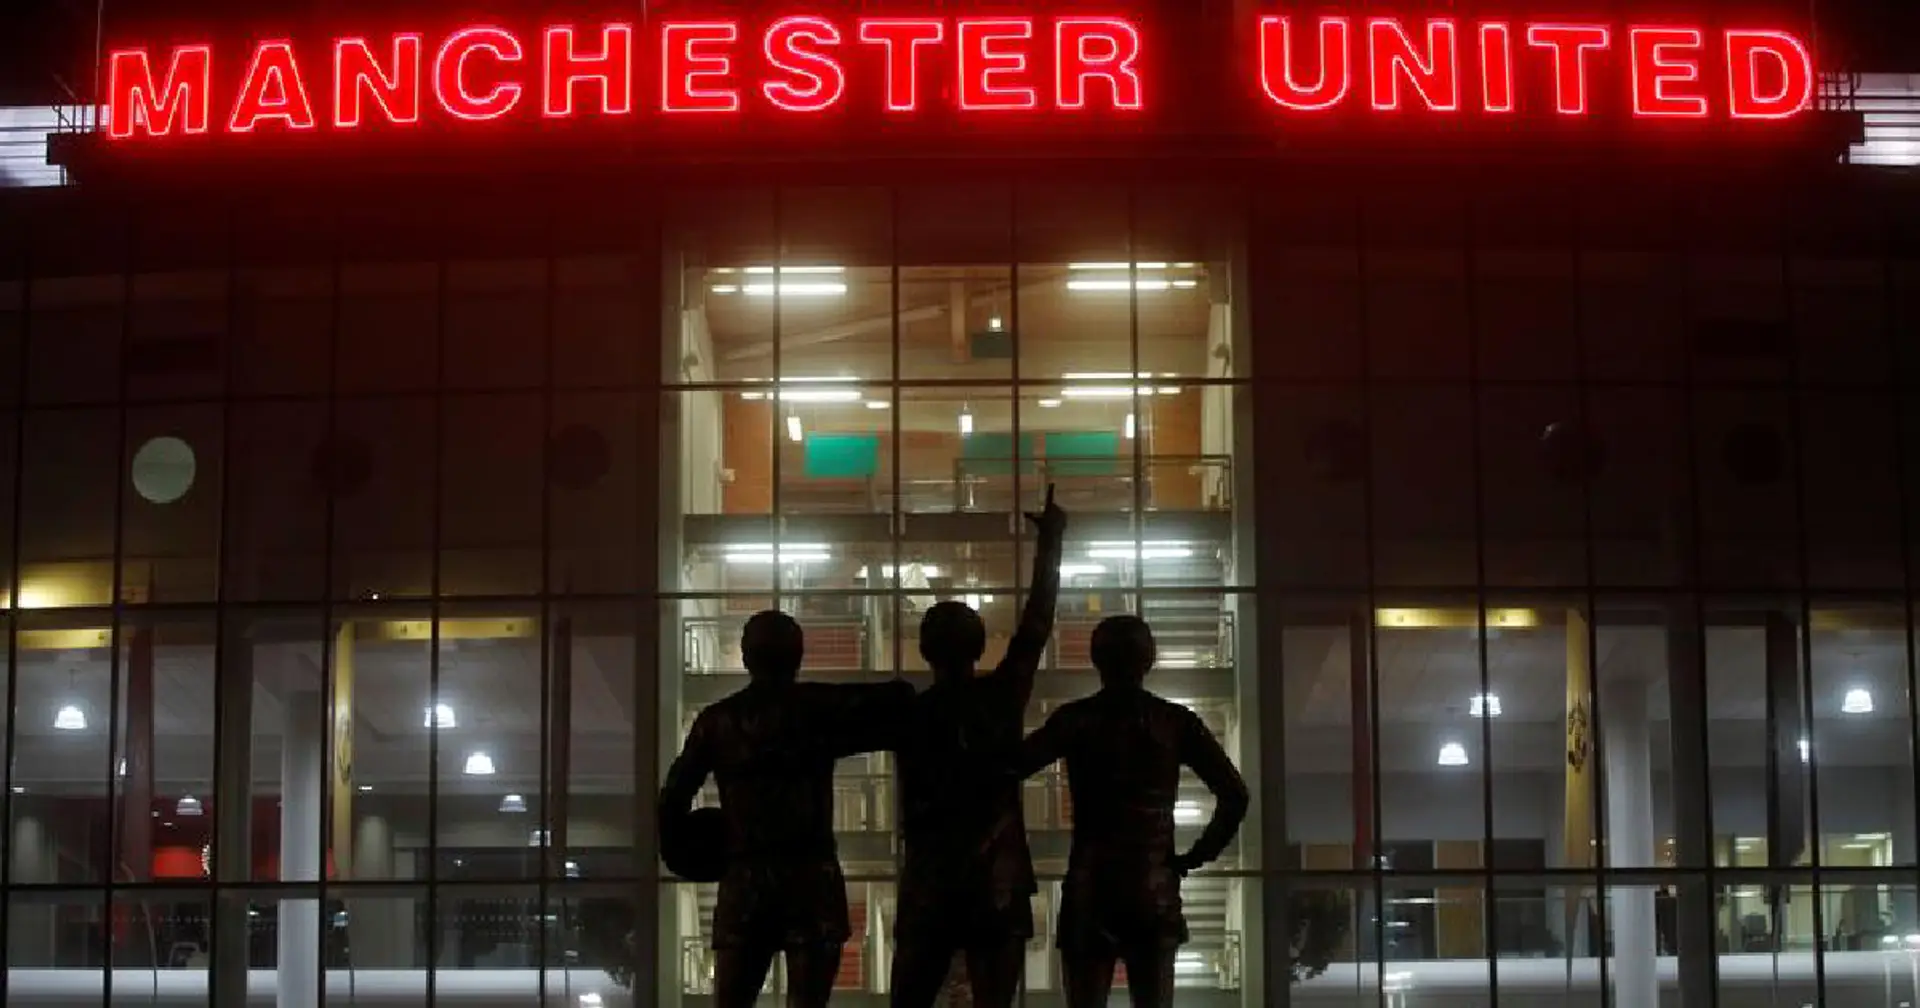 Man United set to donate 60,000 meals to NHS frontline workers amidst coronavirus pandemic